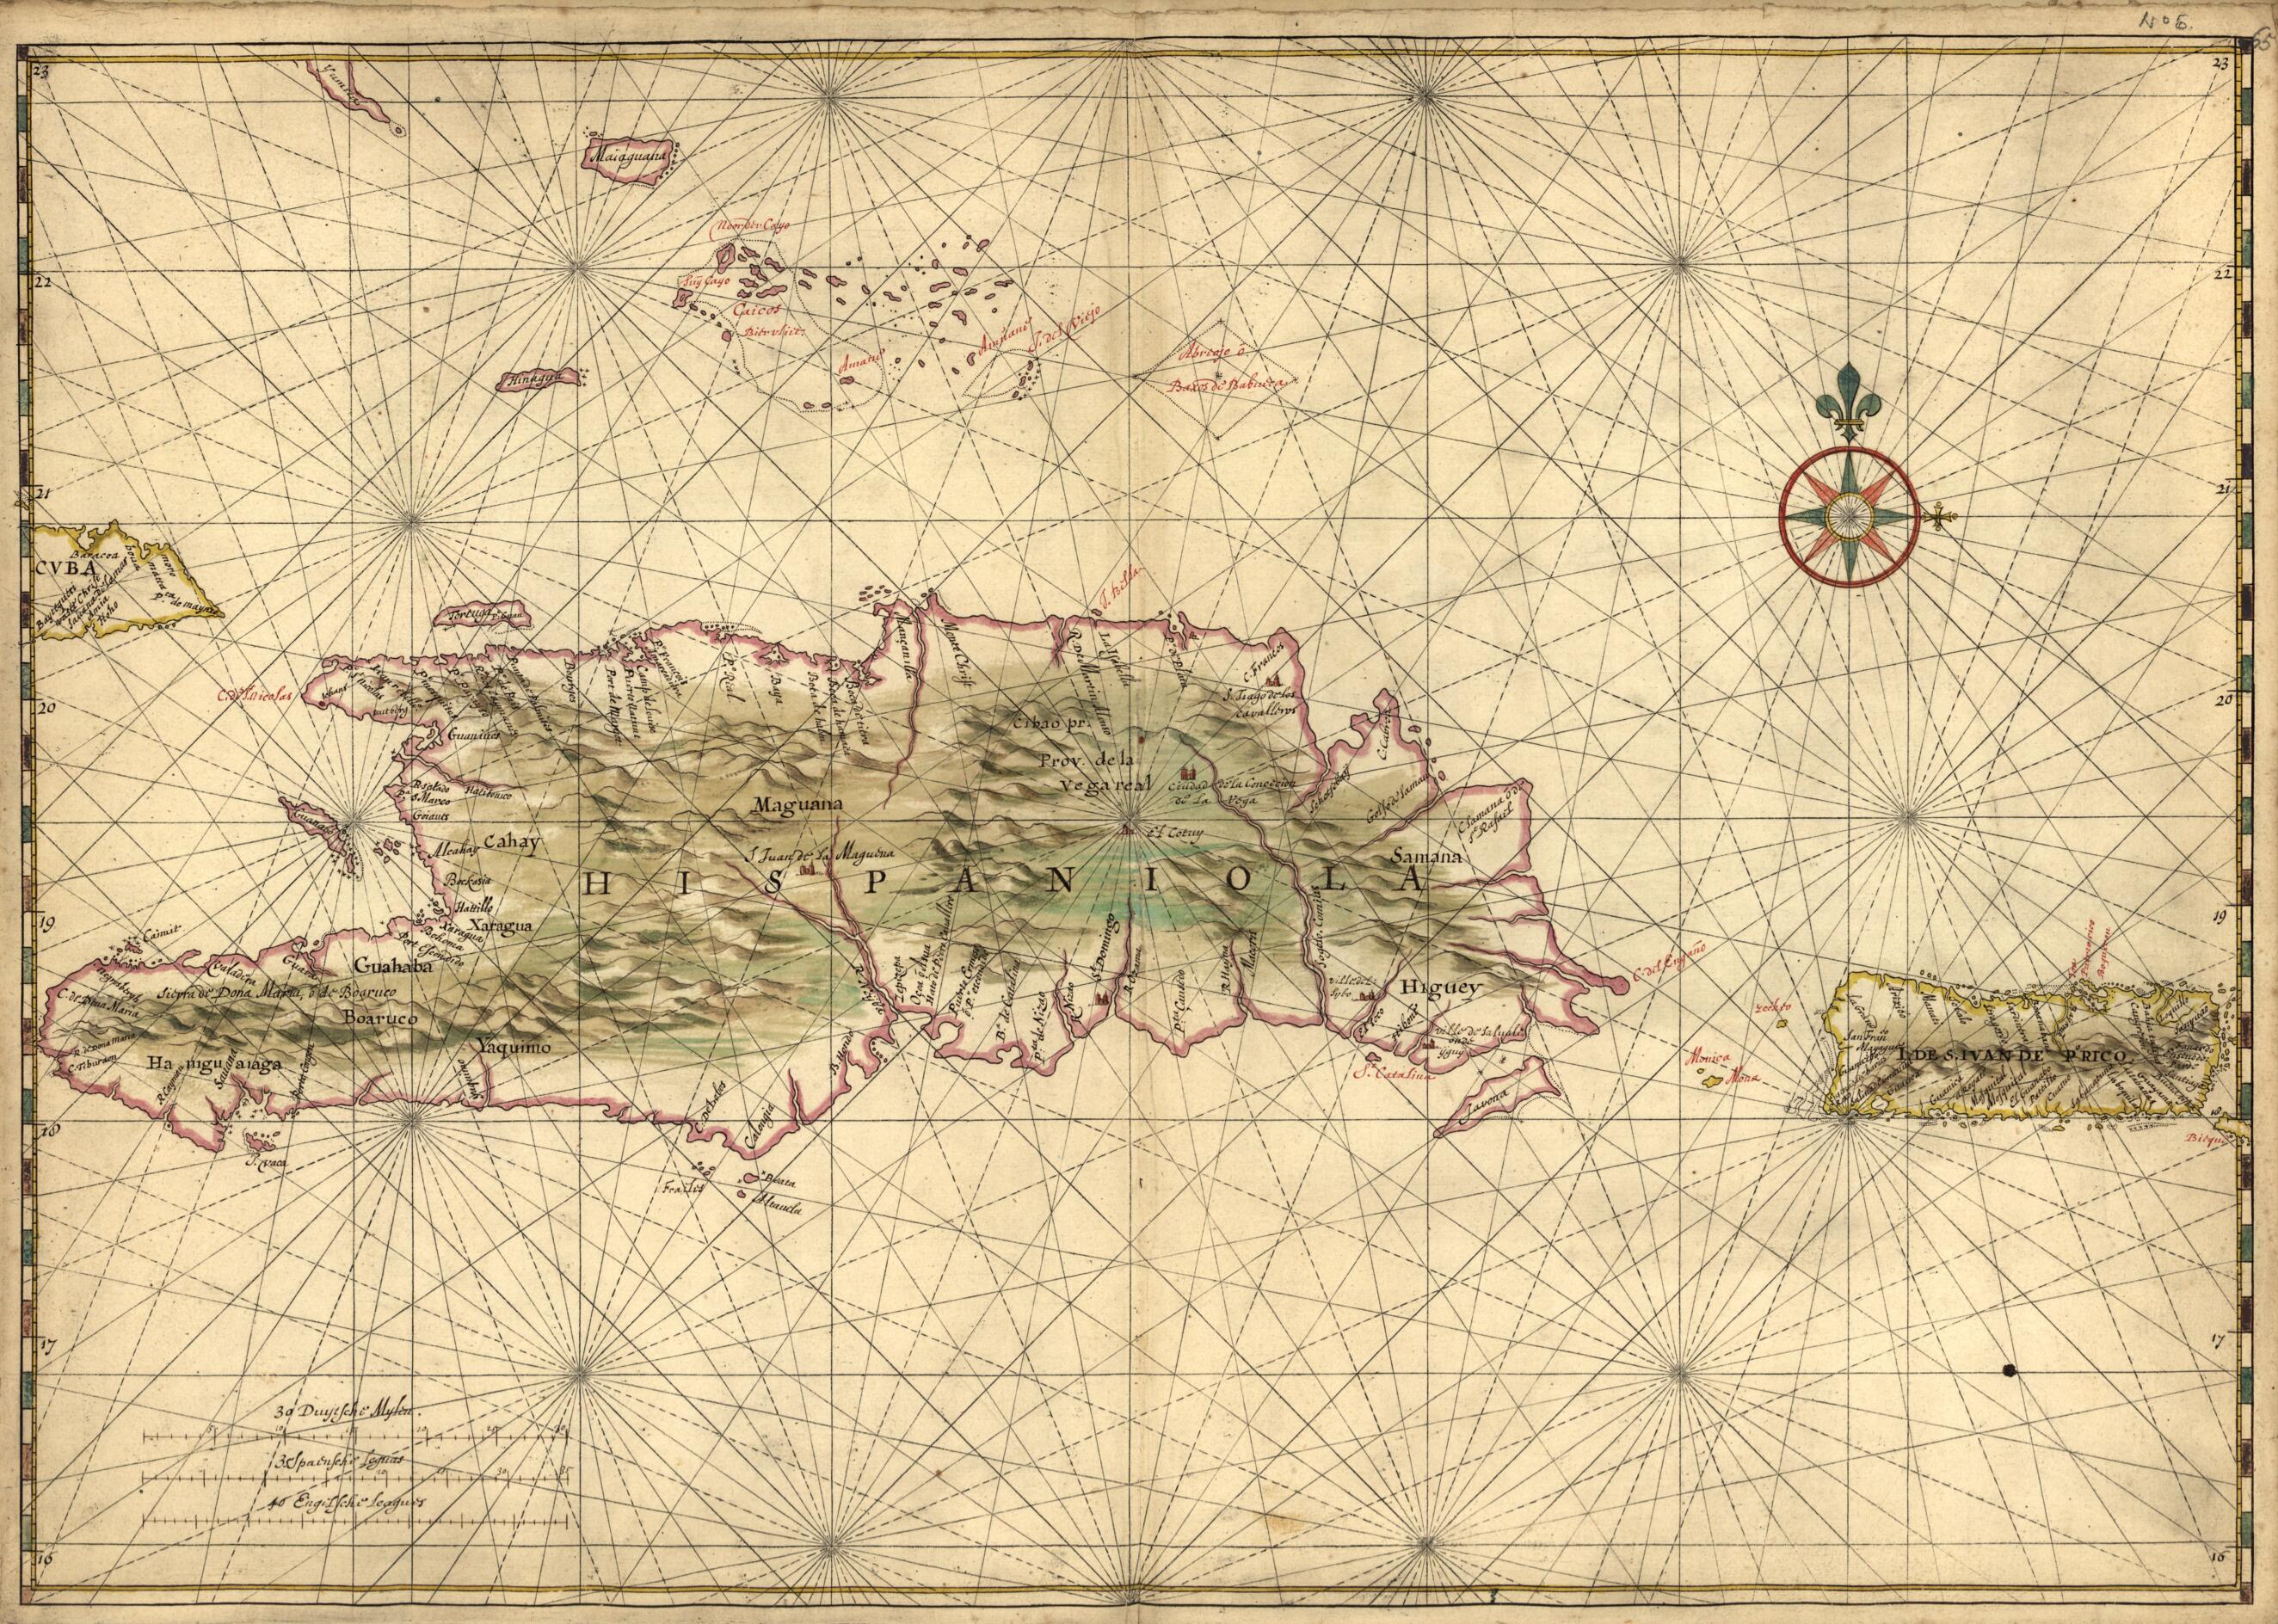 This old map of Map of the Islands of Hispaniola and Puerto Rico. (Hispaniola and Puerto Rico) from 1639 was created by Joan Vinckeboons in 1639